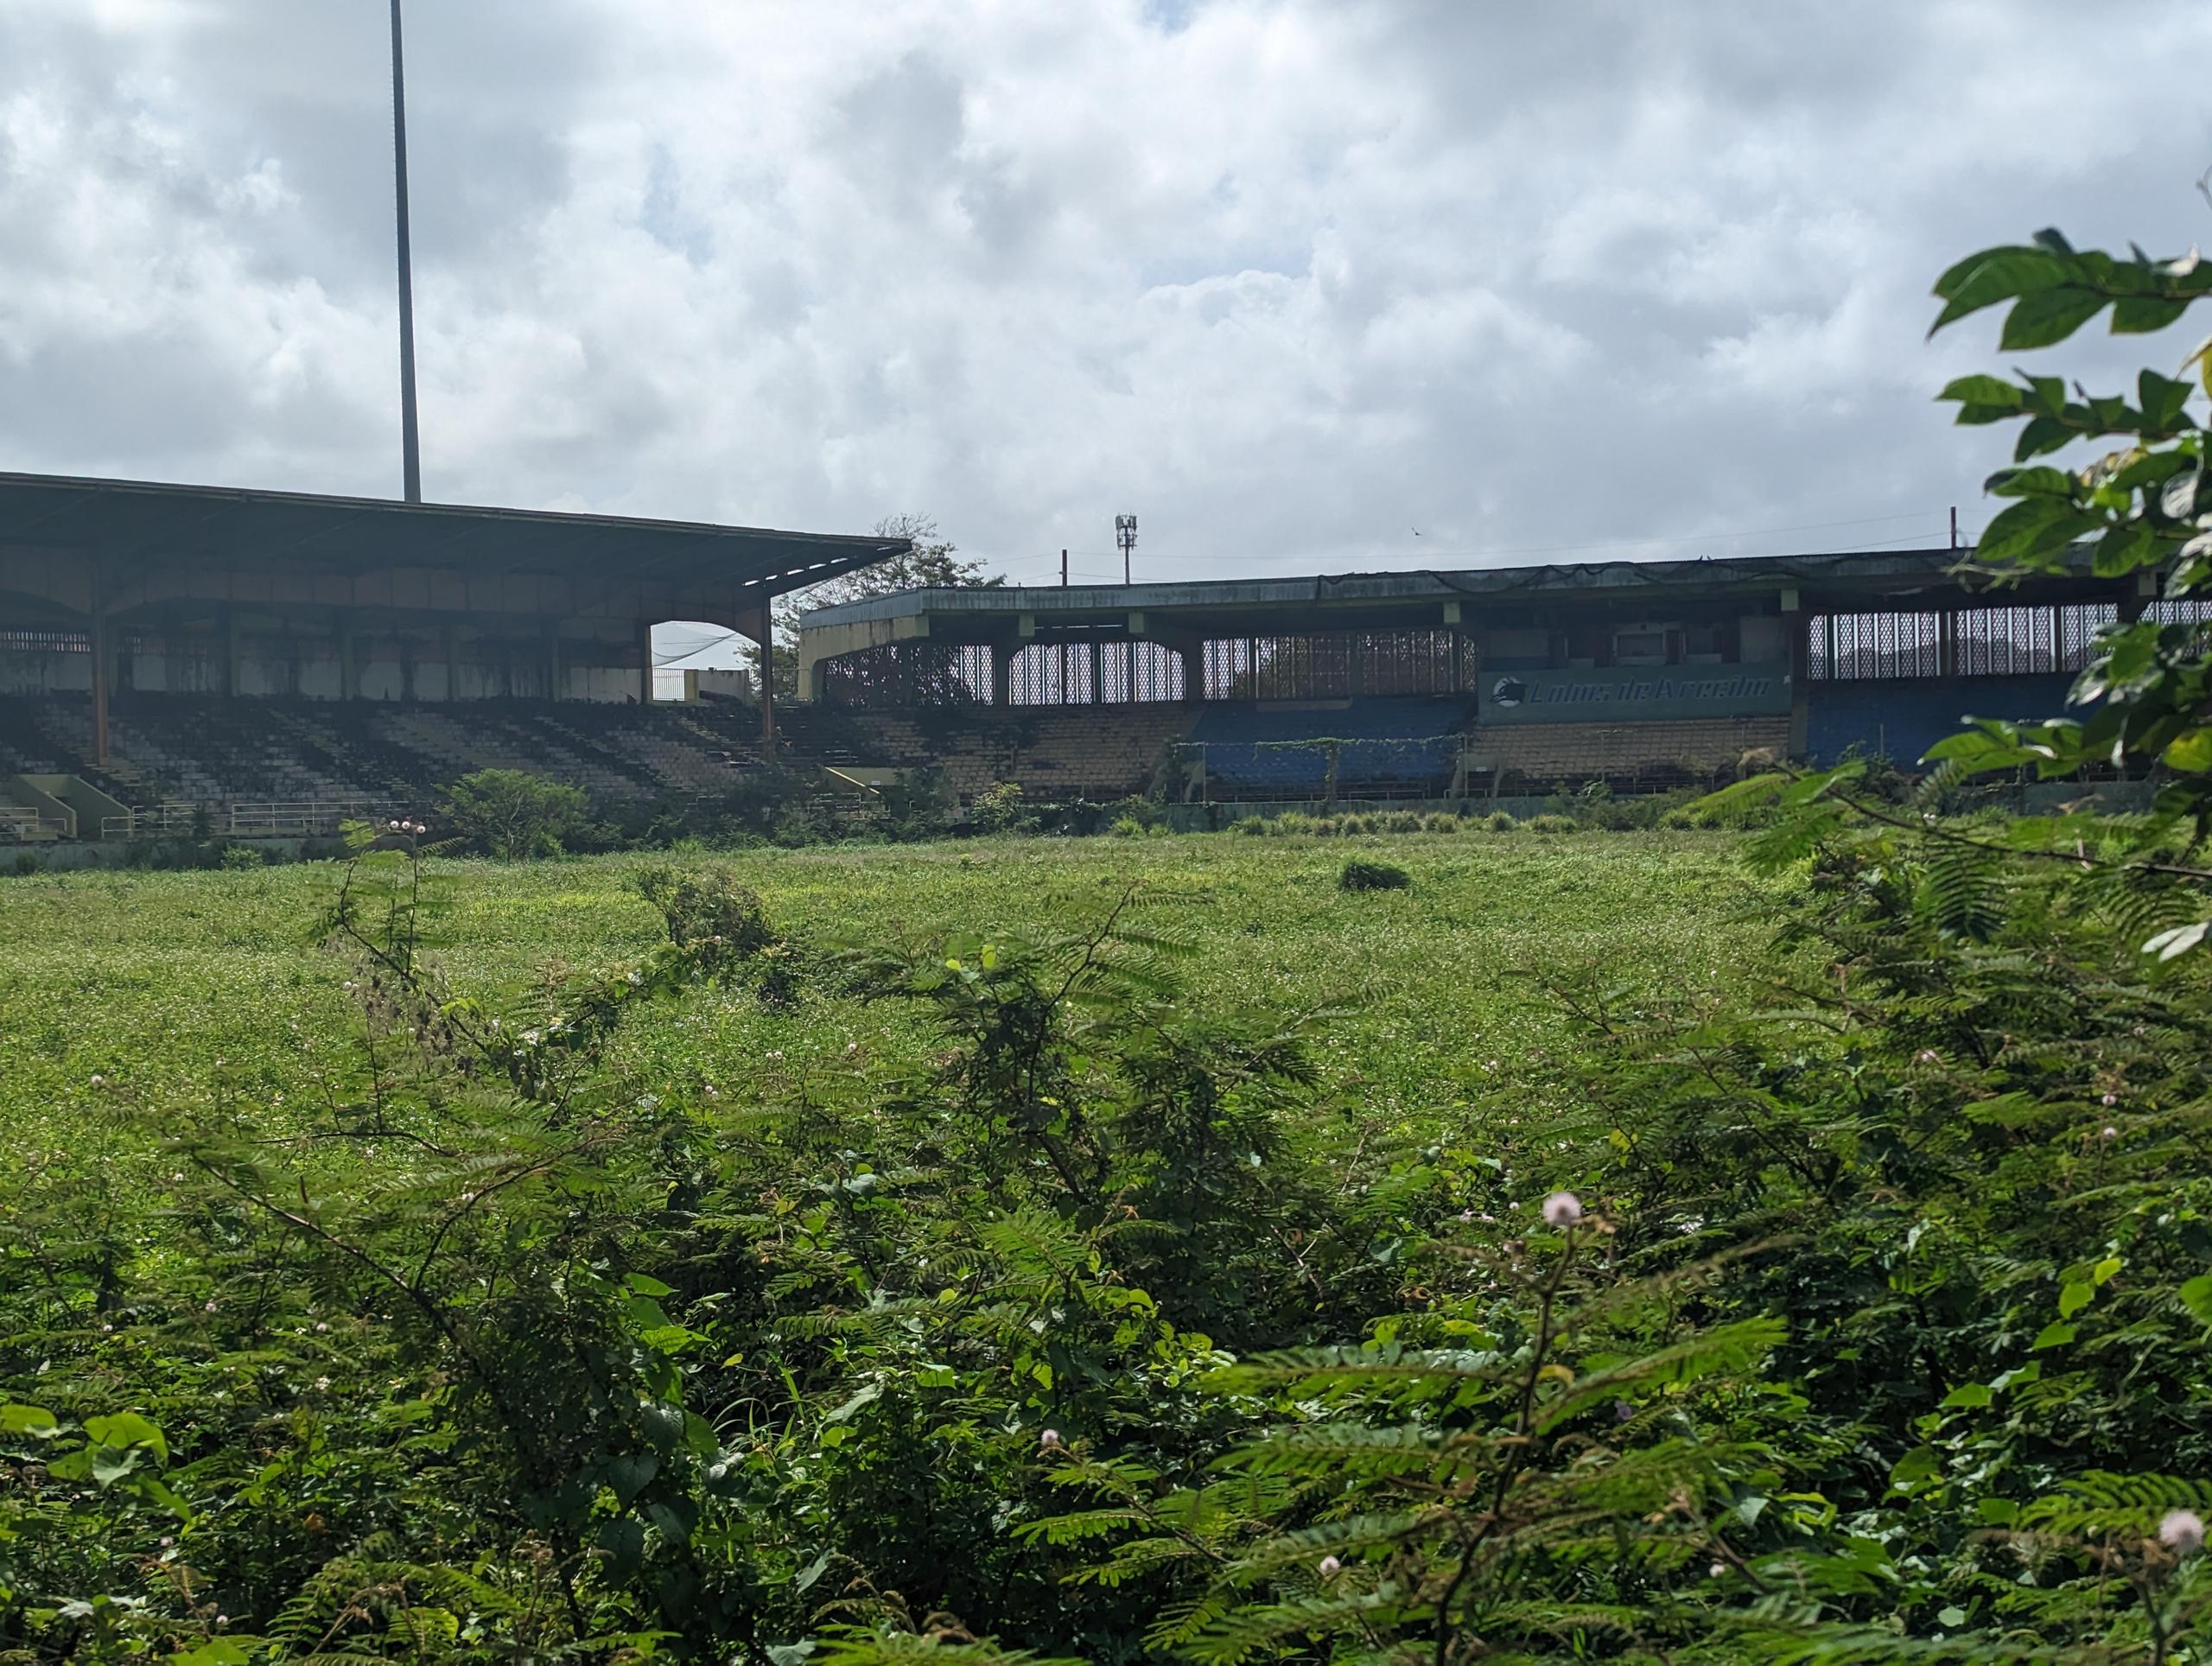 Weeds cover what used to be the field at Luis Rodríguez Olmo Stadium.